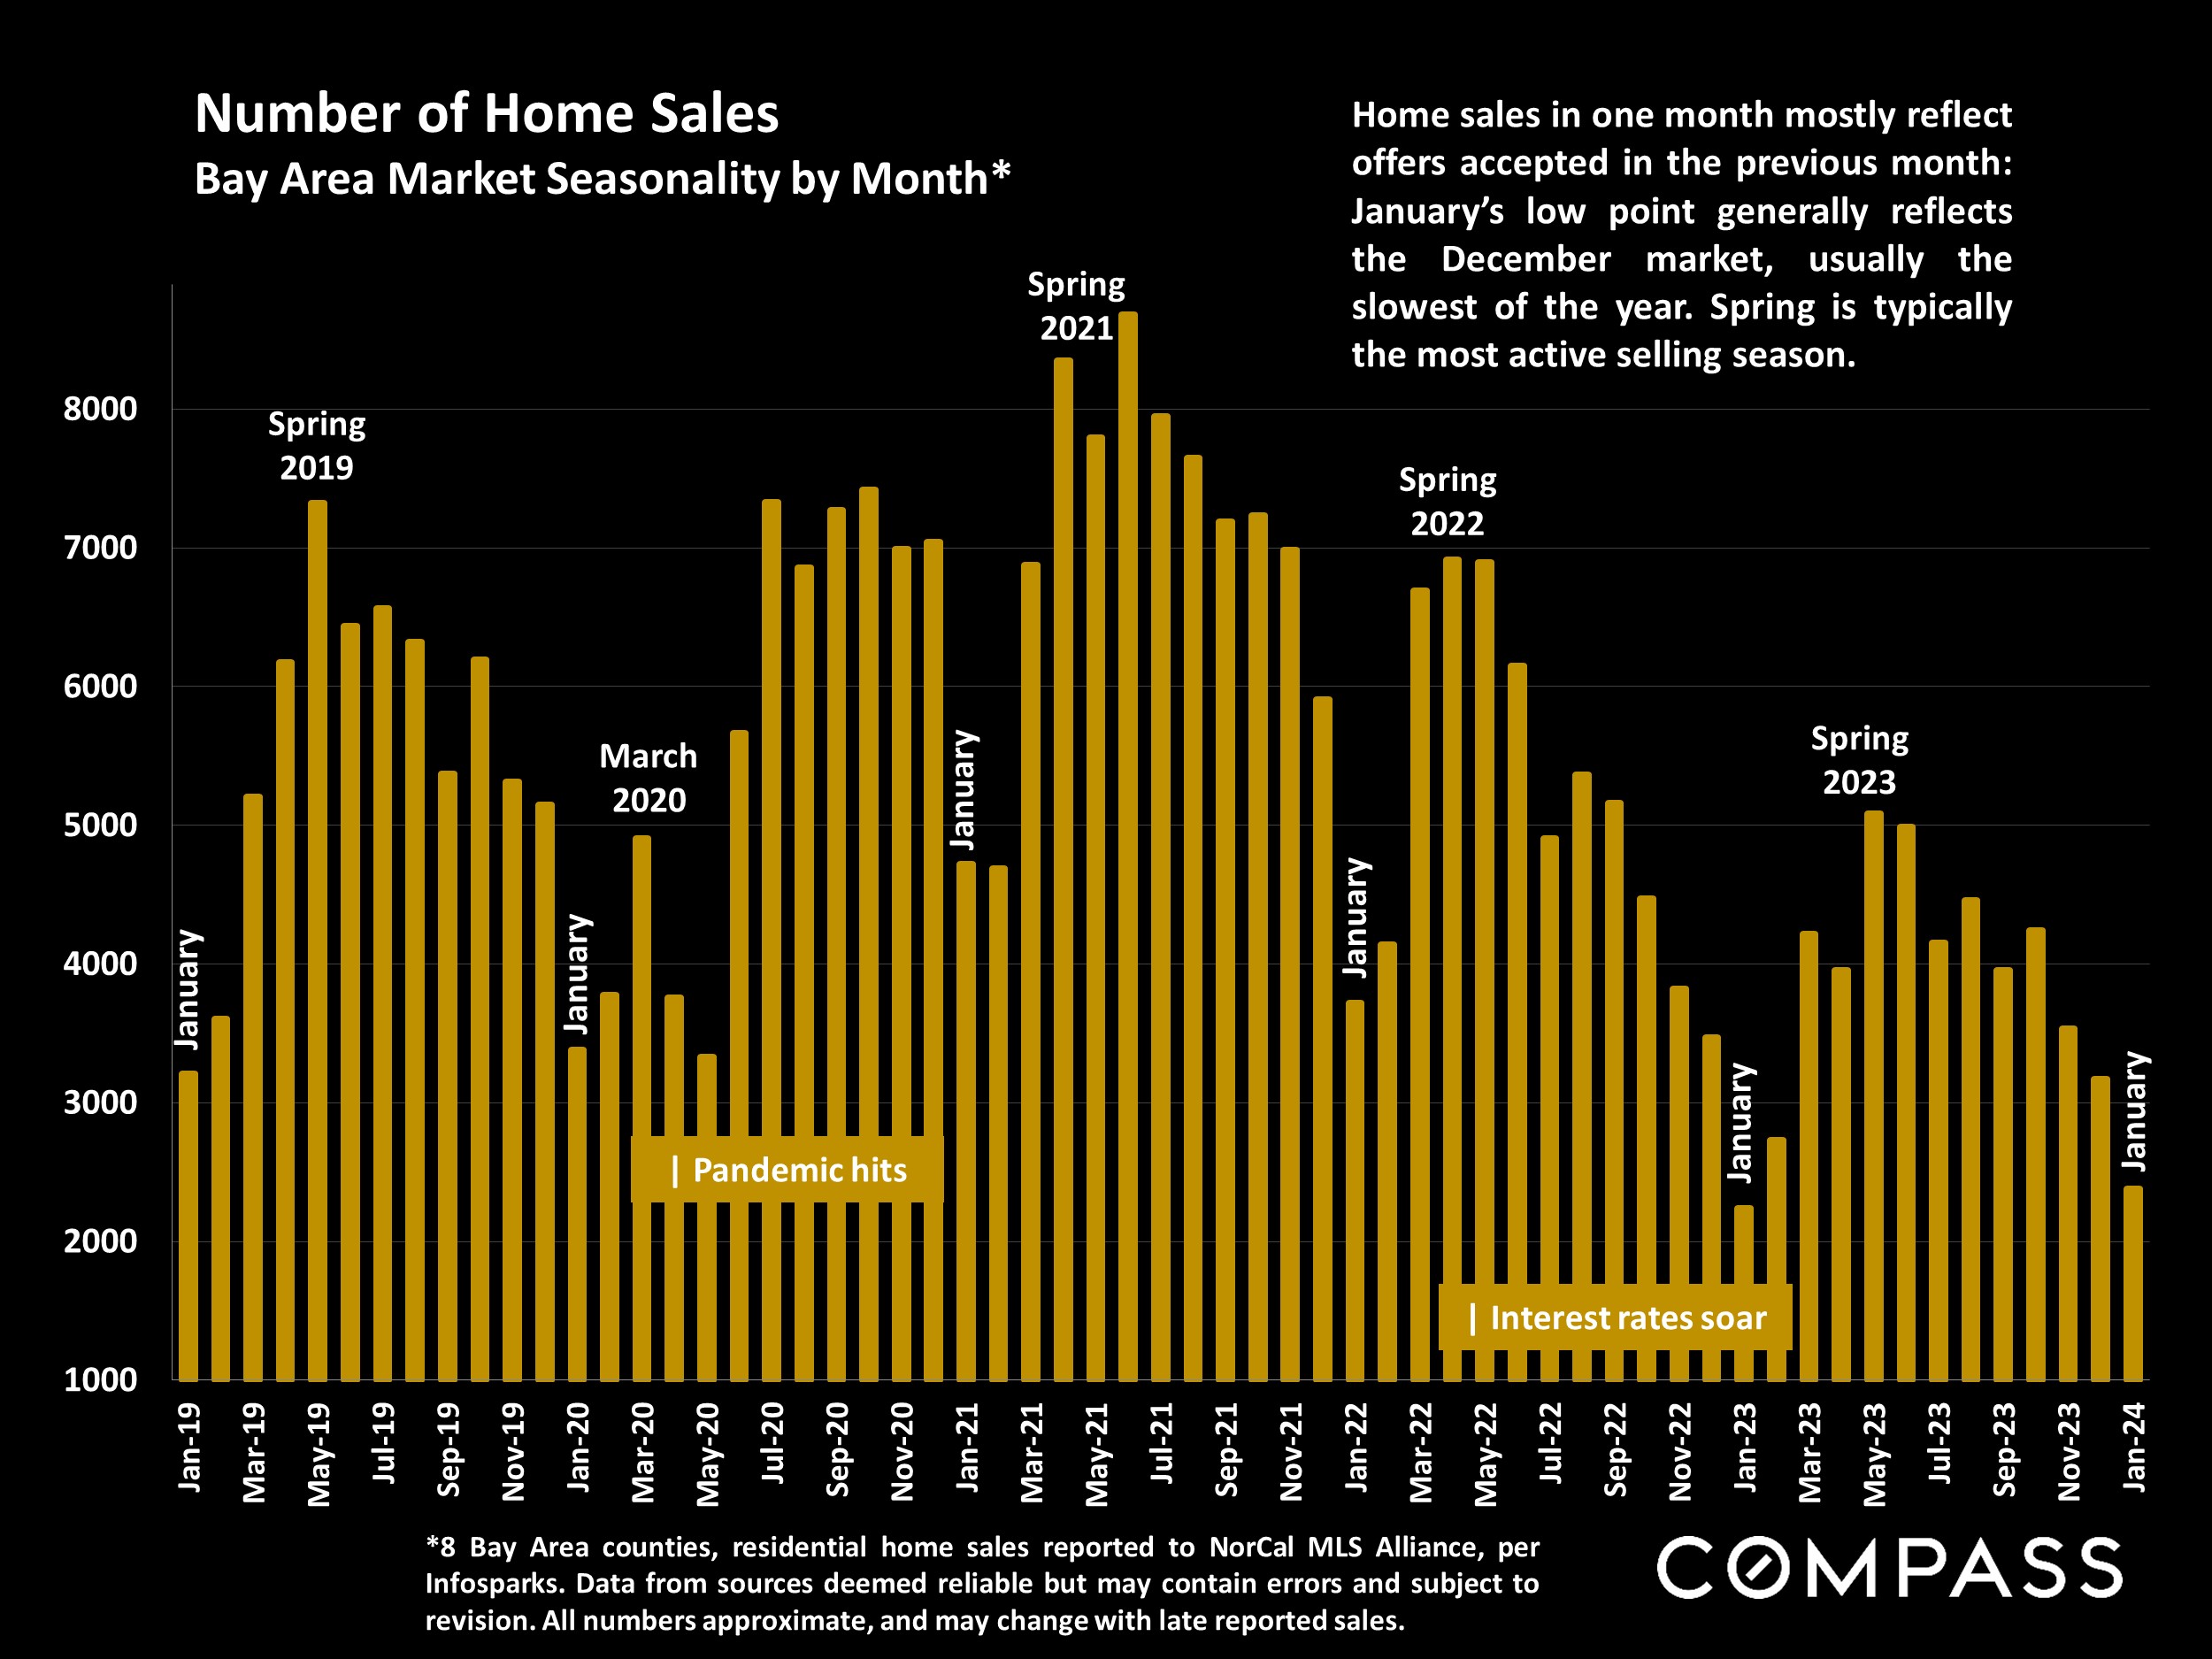 Bay Area Home Sales in Spring